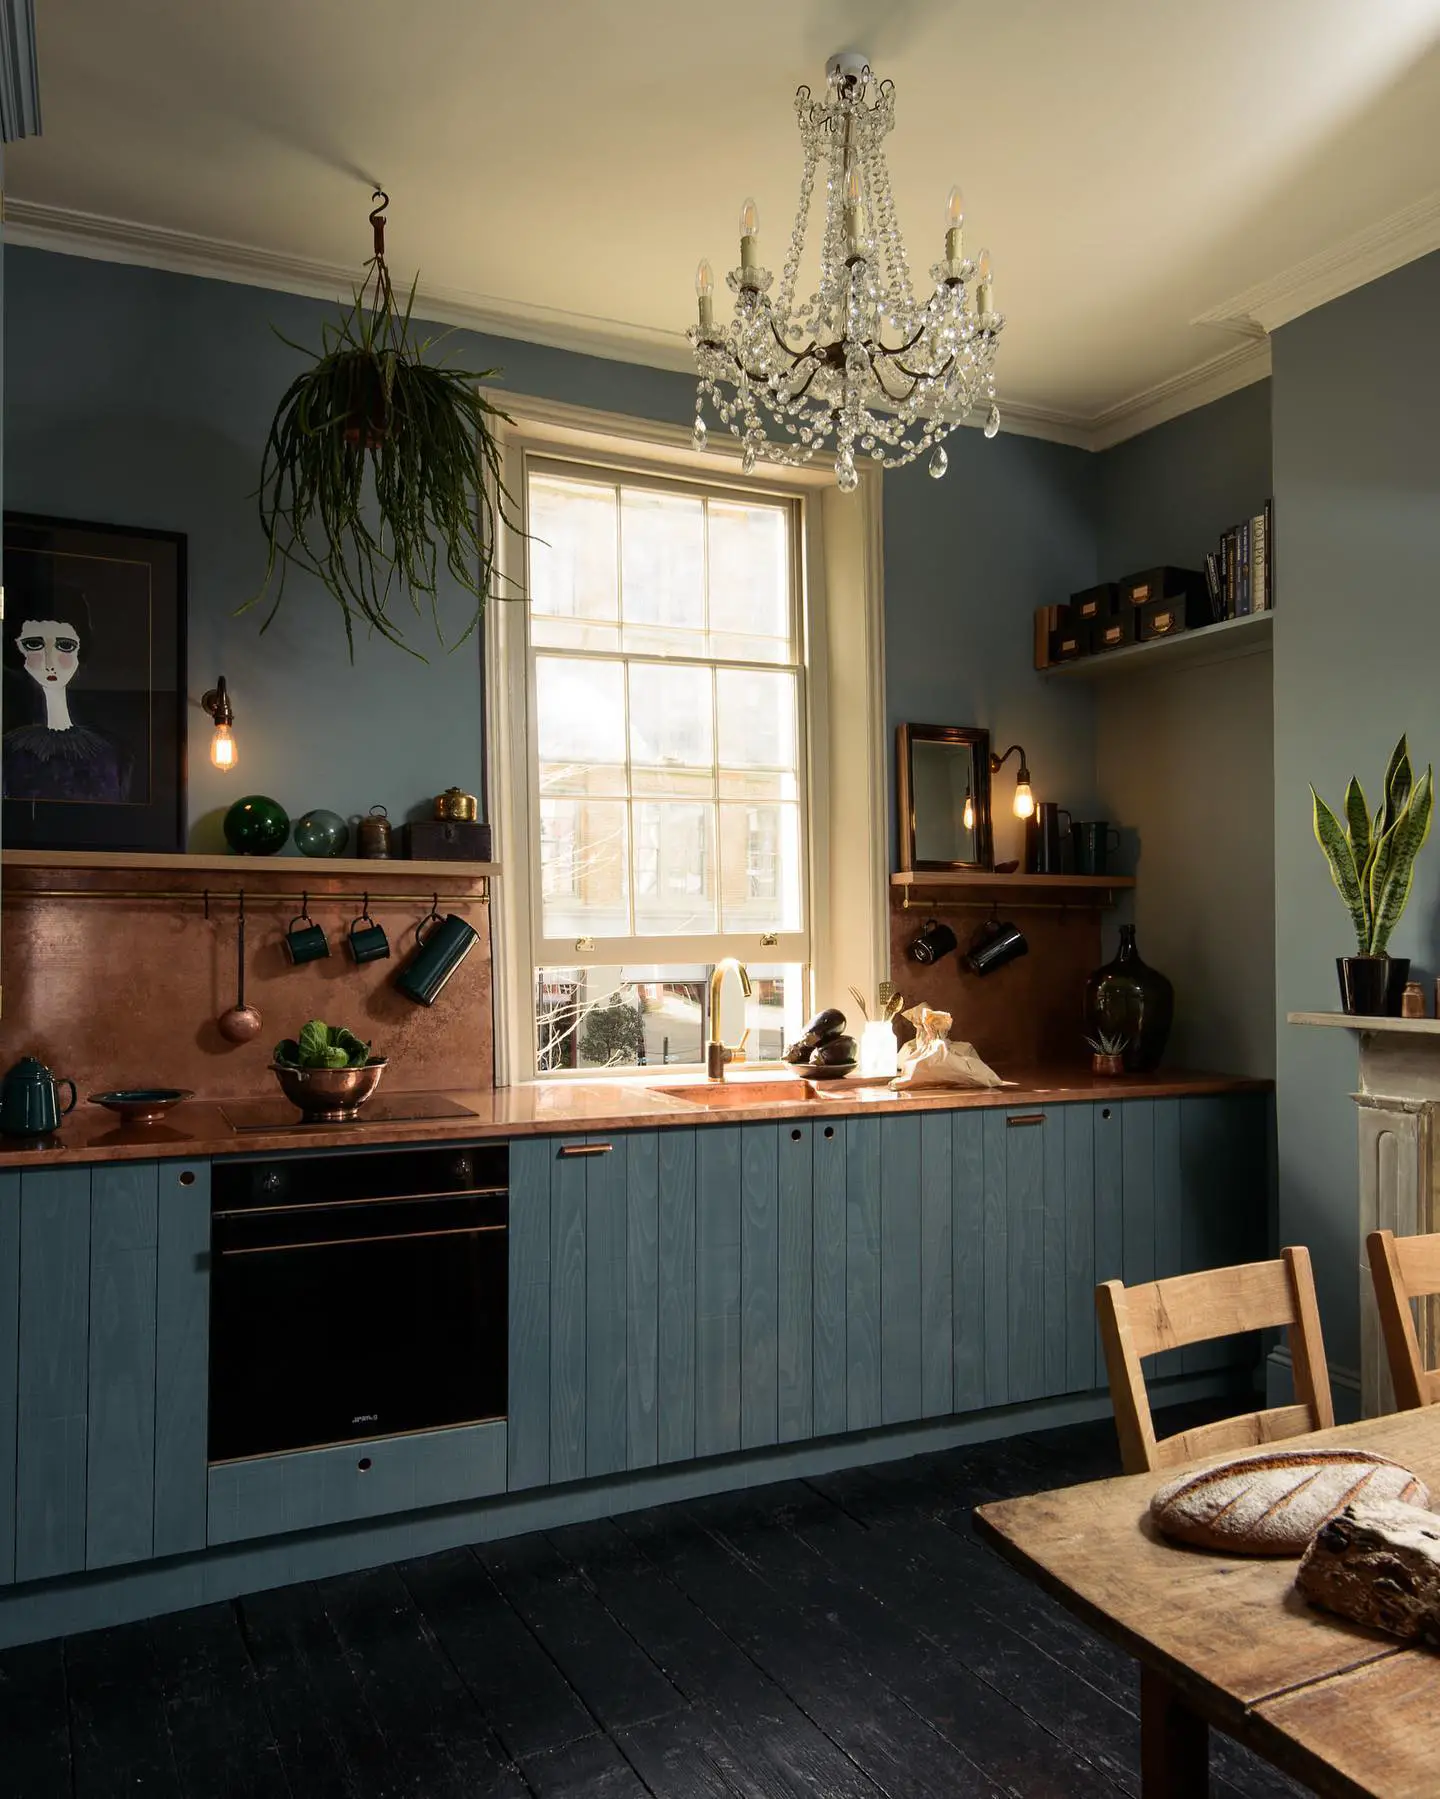 A blue kitchen with a black kitchen floor and wooden table and chairs.